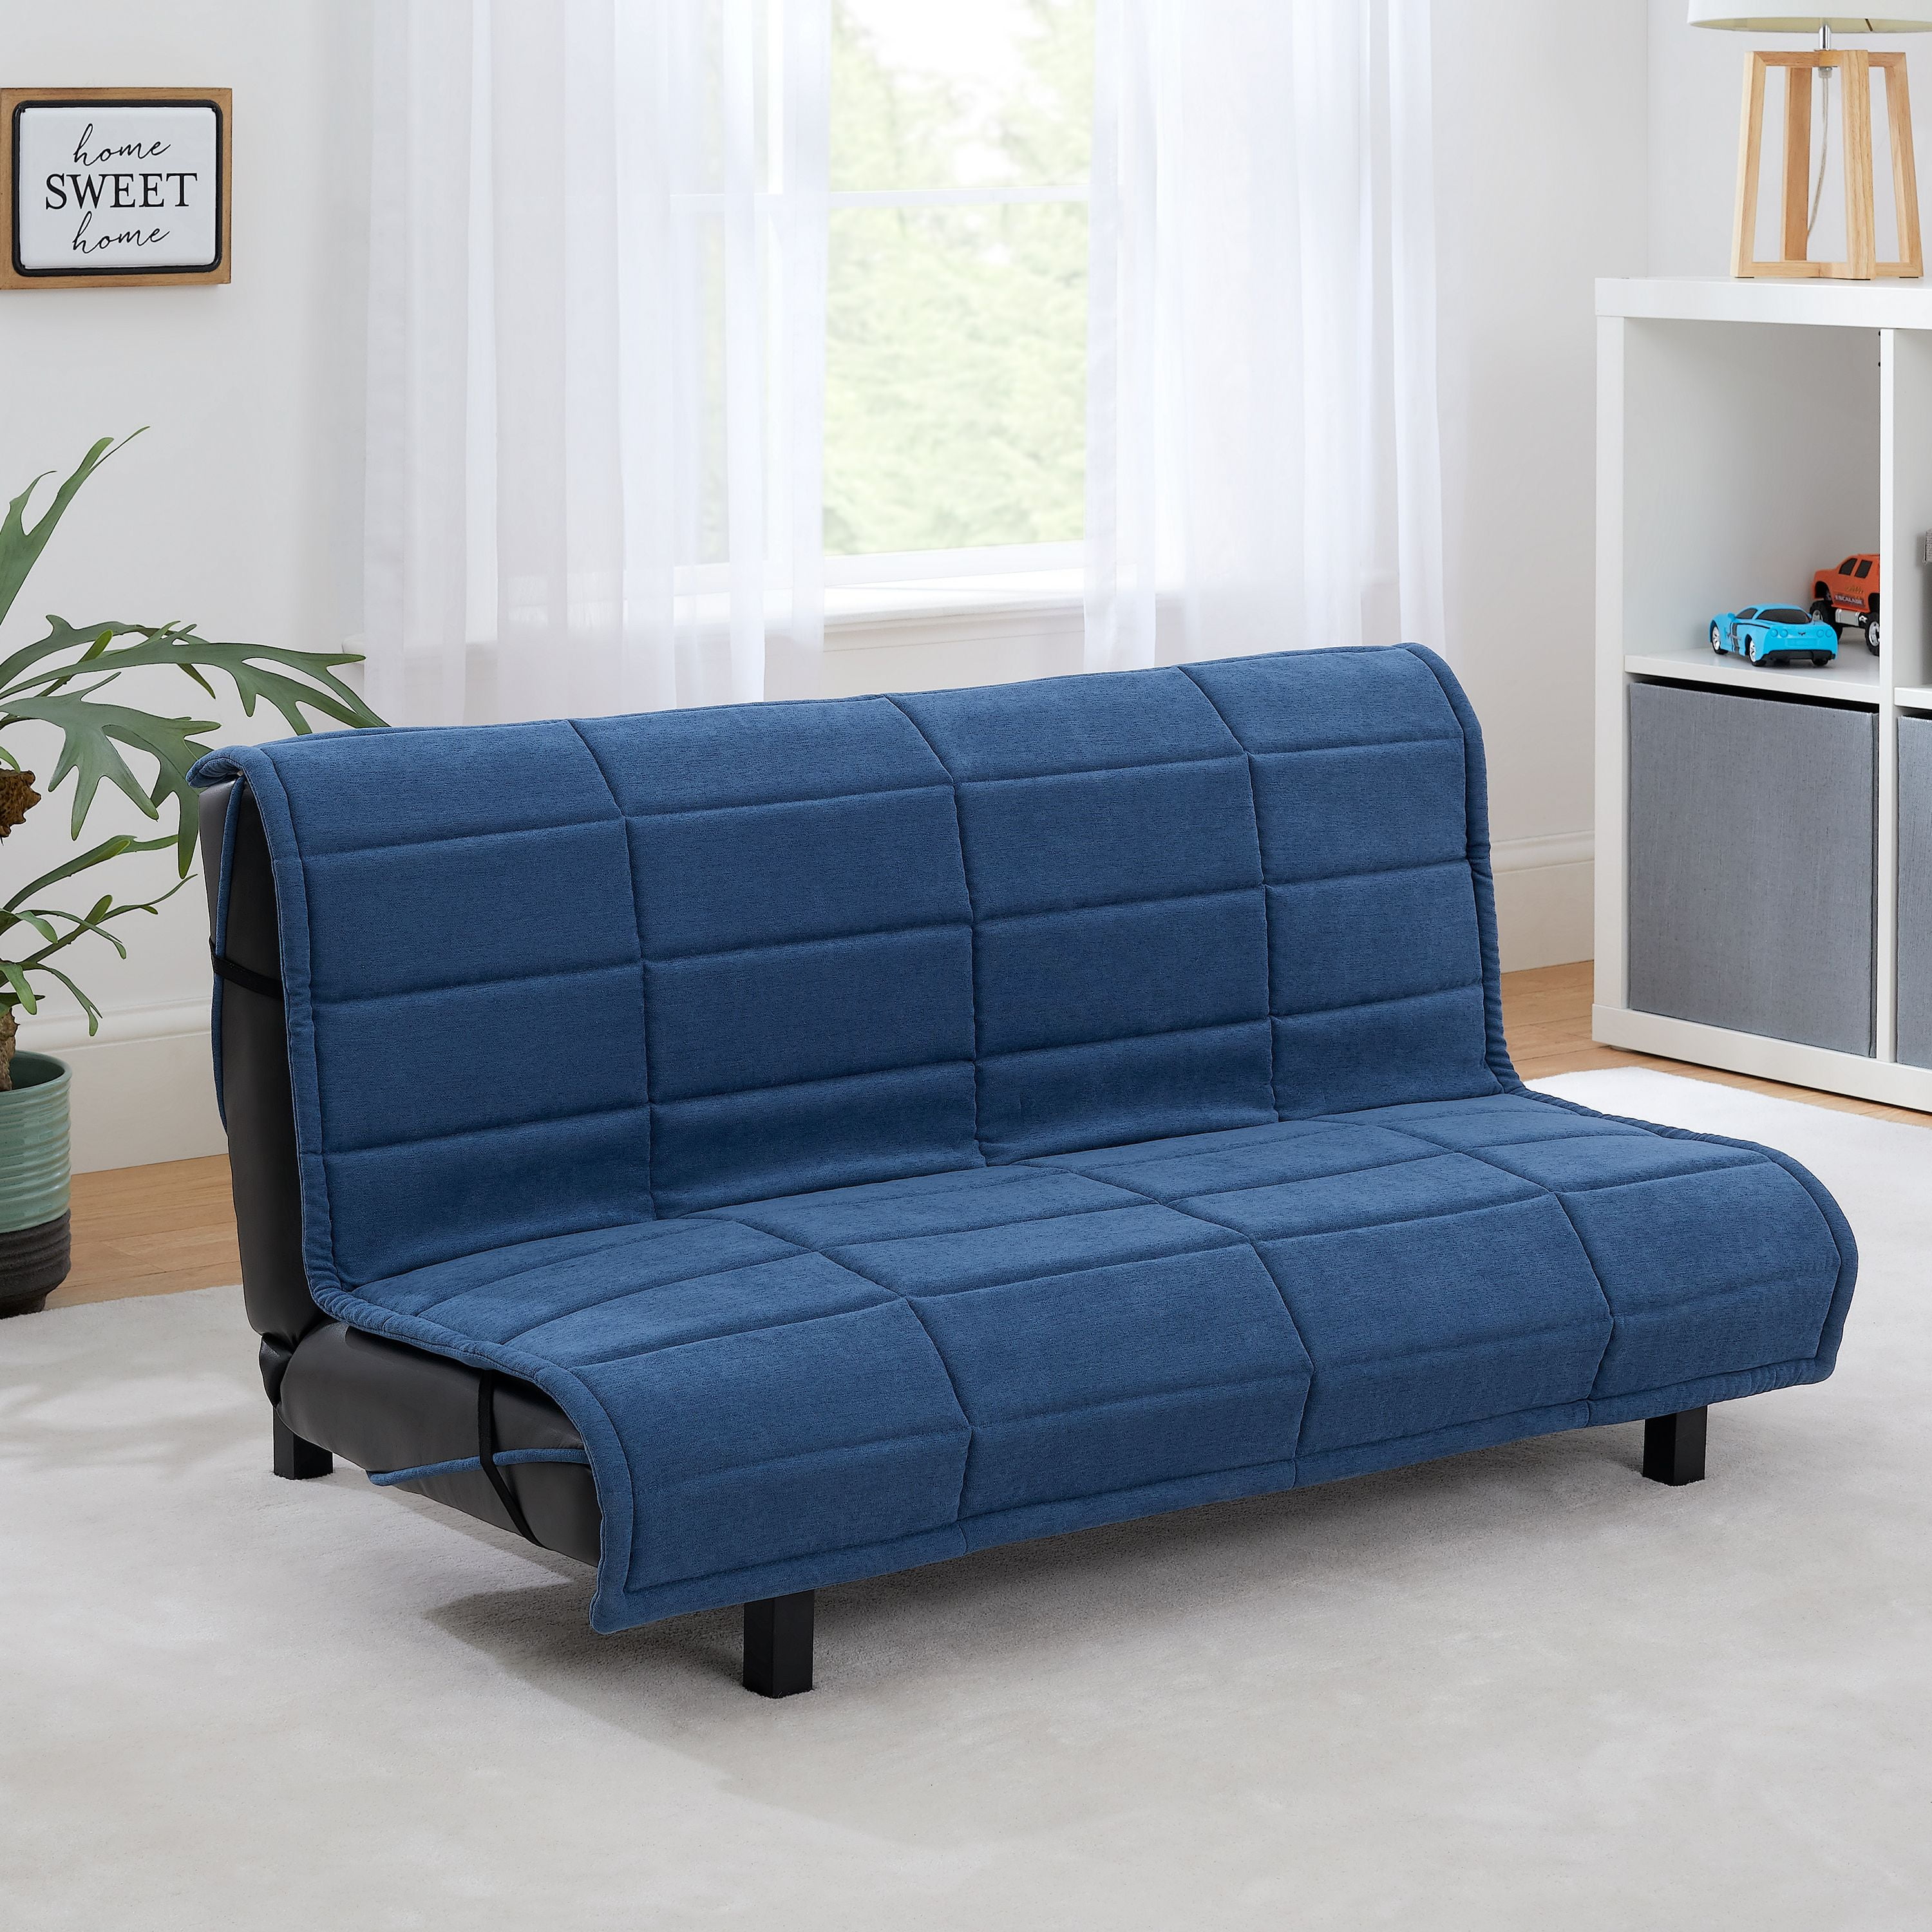 Your Zone Grid Tufted Upholstered Sofa Bed, Blue Walmart